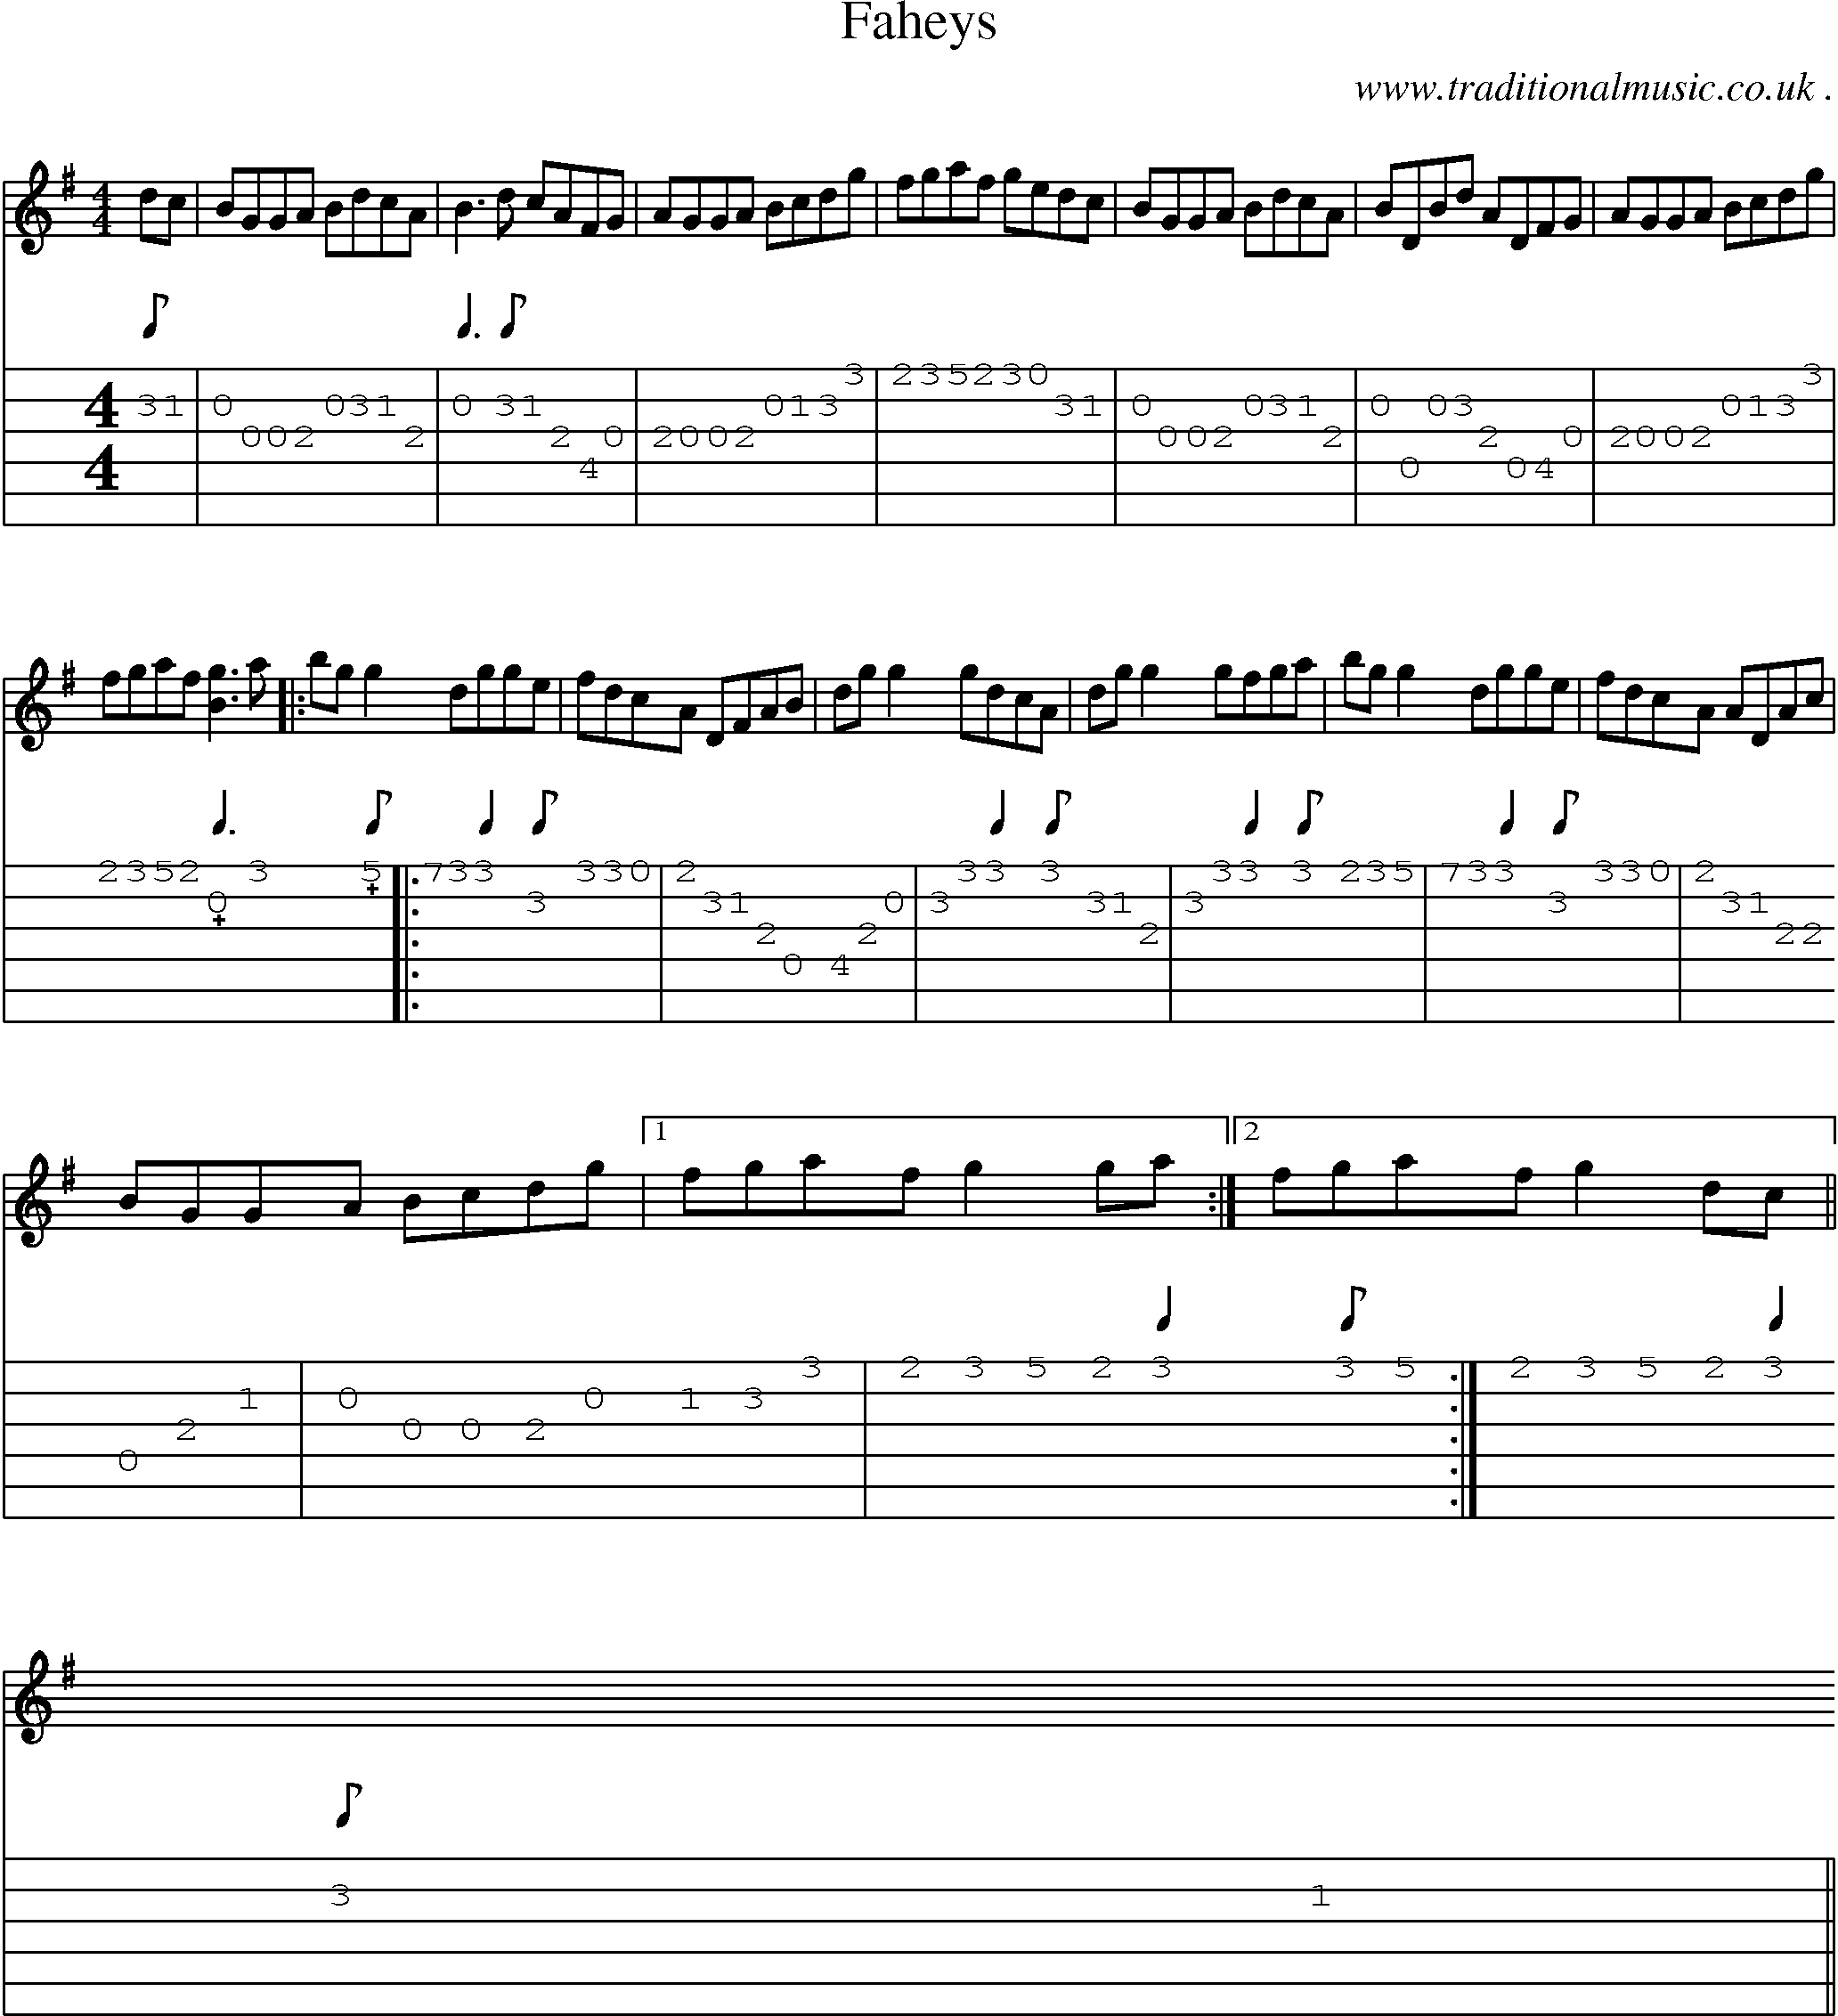 Sheet-Music and Guitar Tabs for Faheys